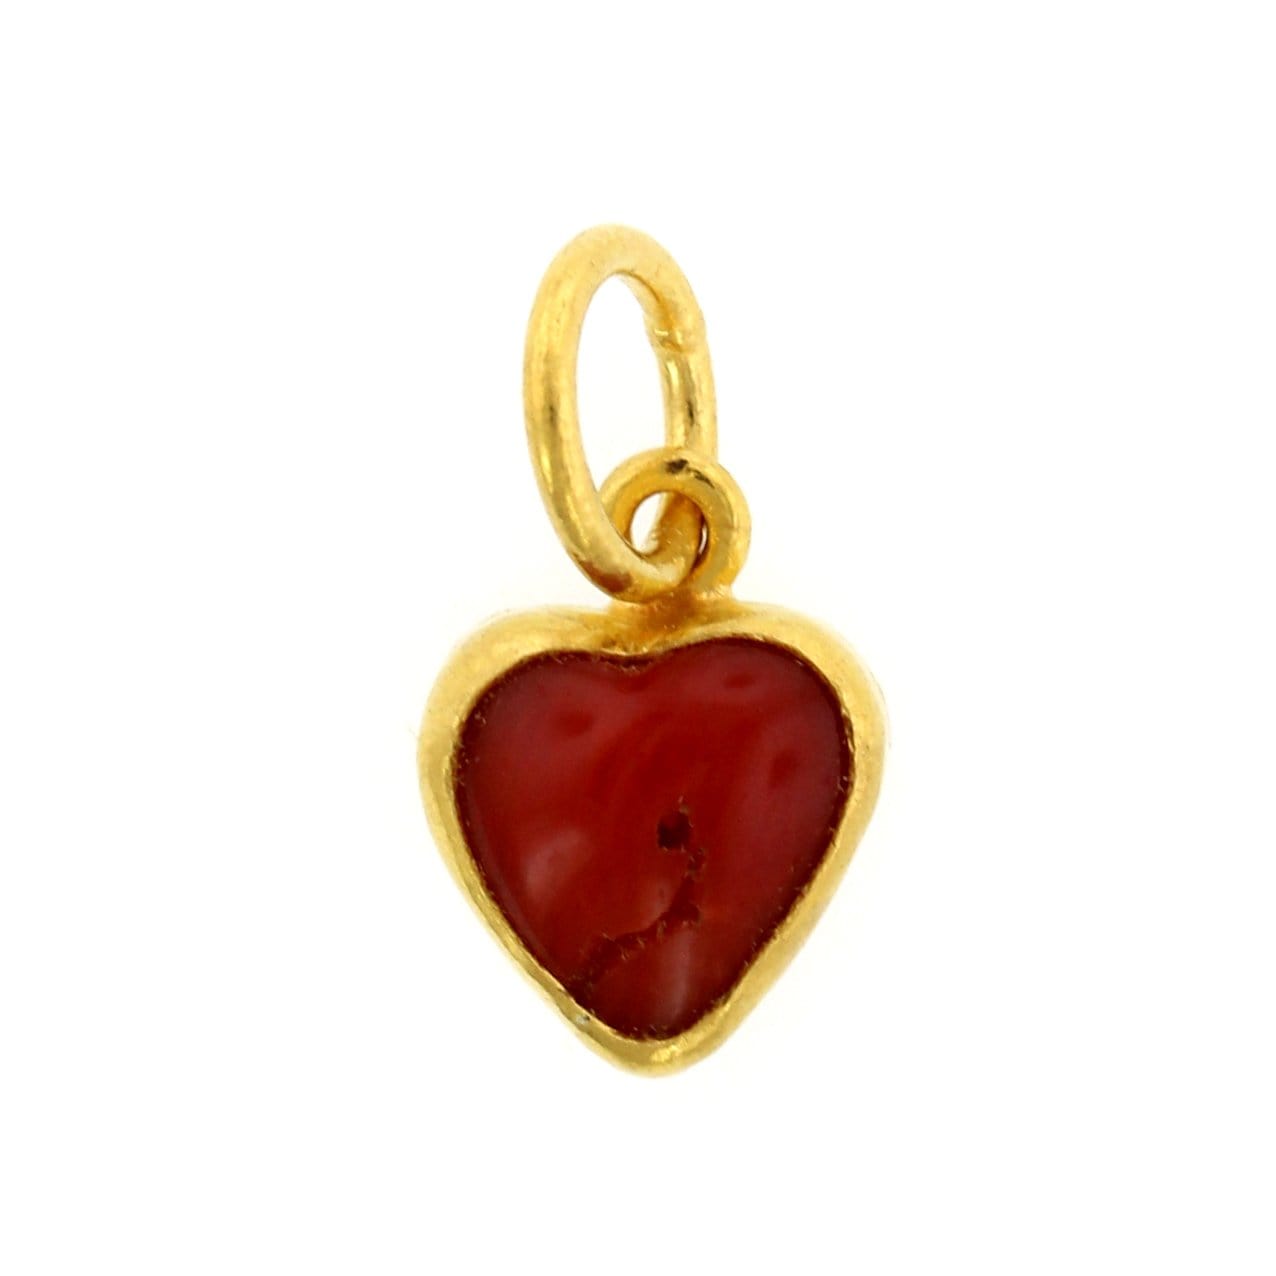 24K Yellow Gold Coral Heart Charm